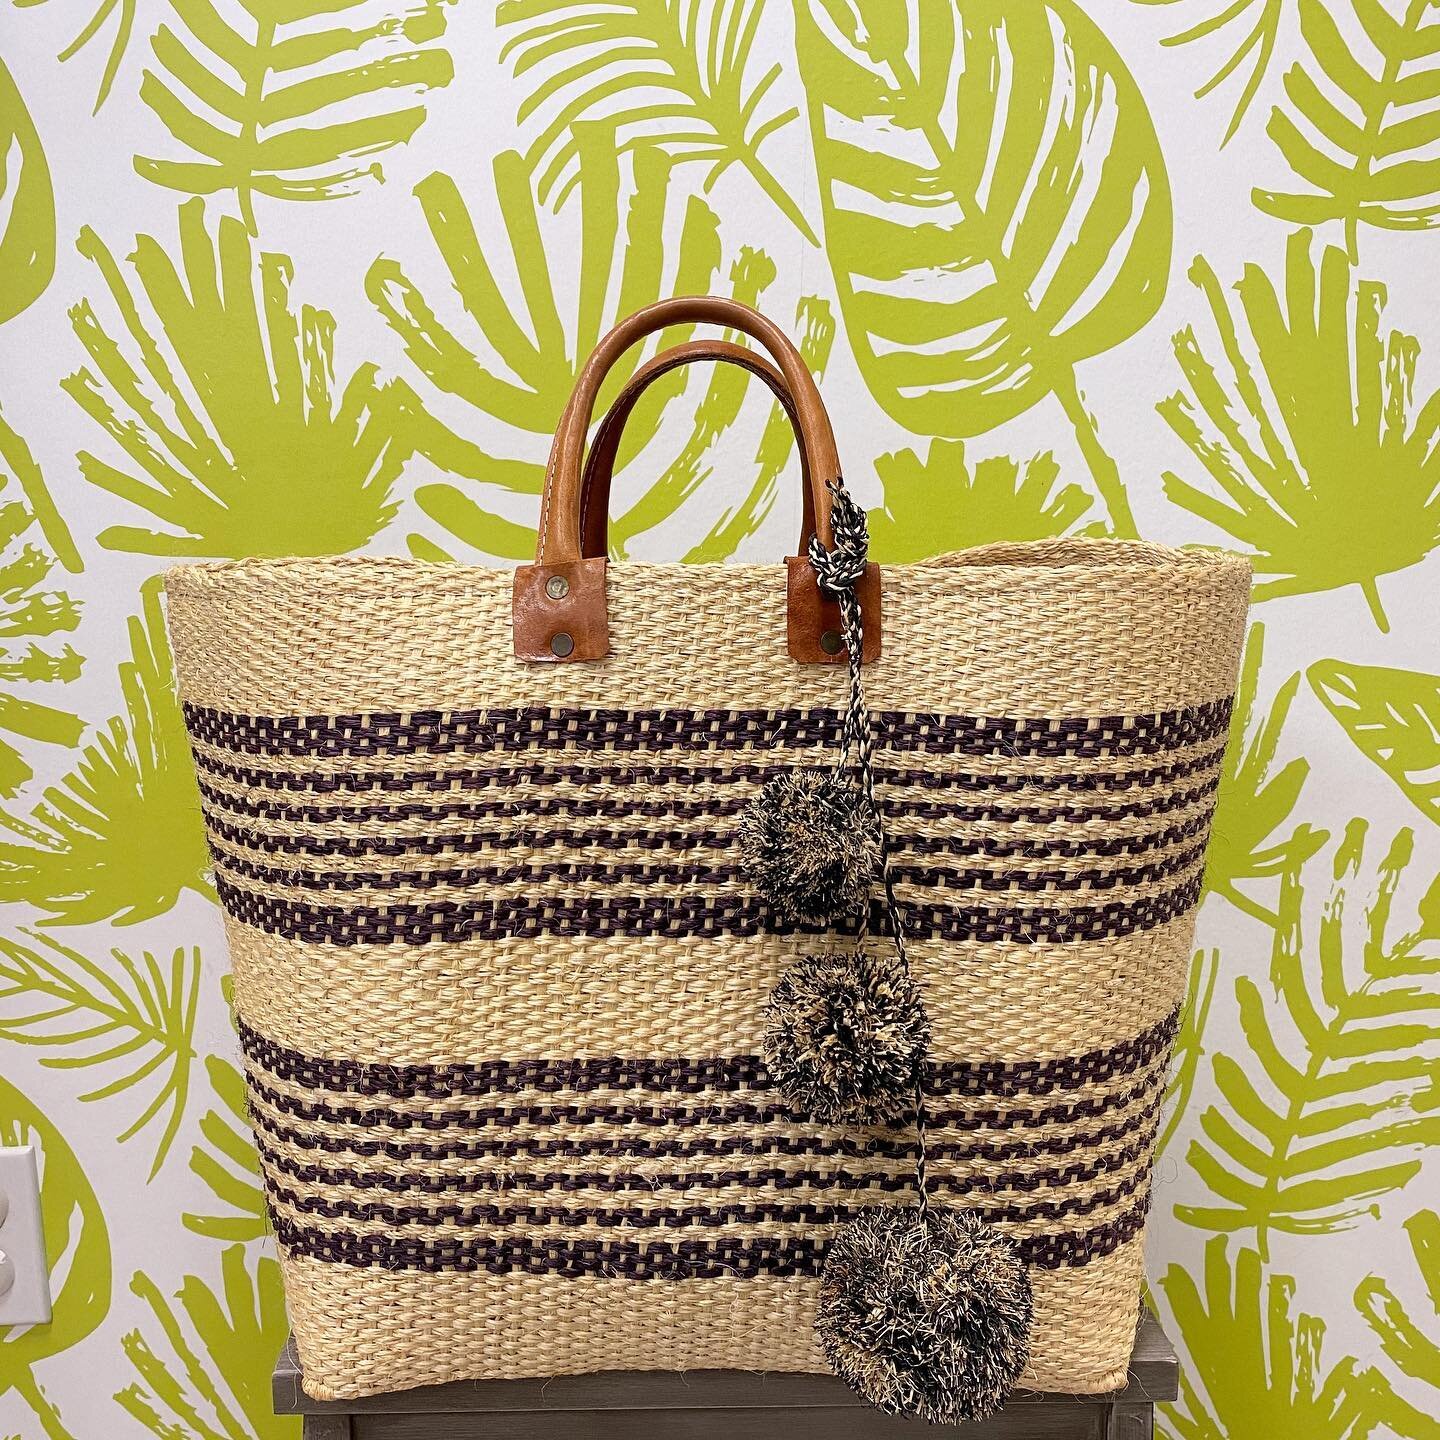 #martial Wicker Pom Pom Tote from Tuckernuck Retails at $155.00 Mint Price: $59.99 (slight stain on back)

Don&rsquo;t forget we ship and offer curbside pickup! ♻️ Call 📞 703-836-6468 to buy today! ✅ Authenticity is guaranteed with a money back prom